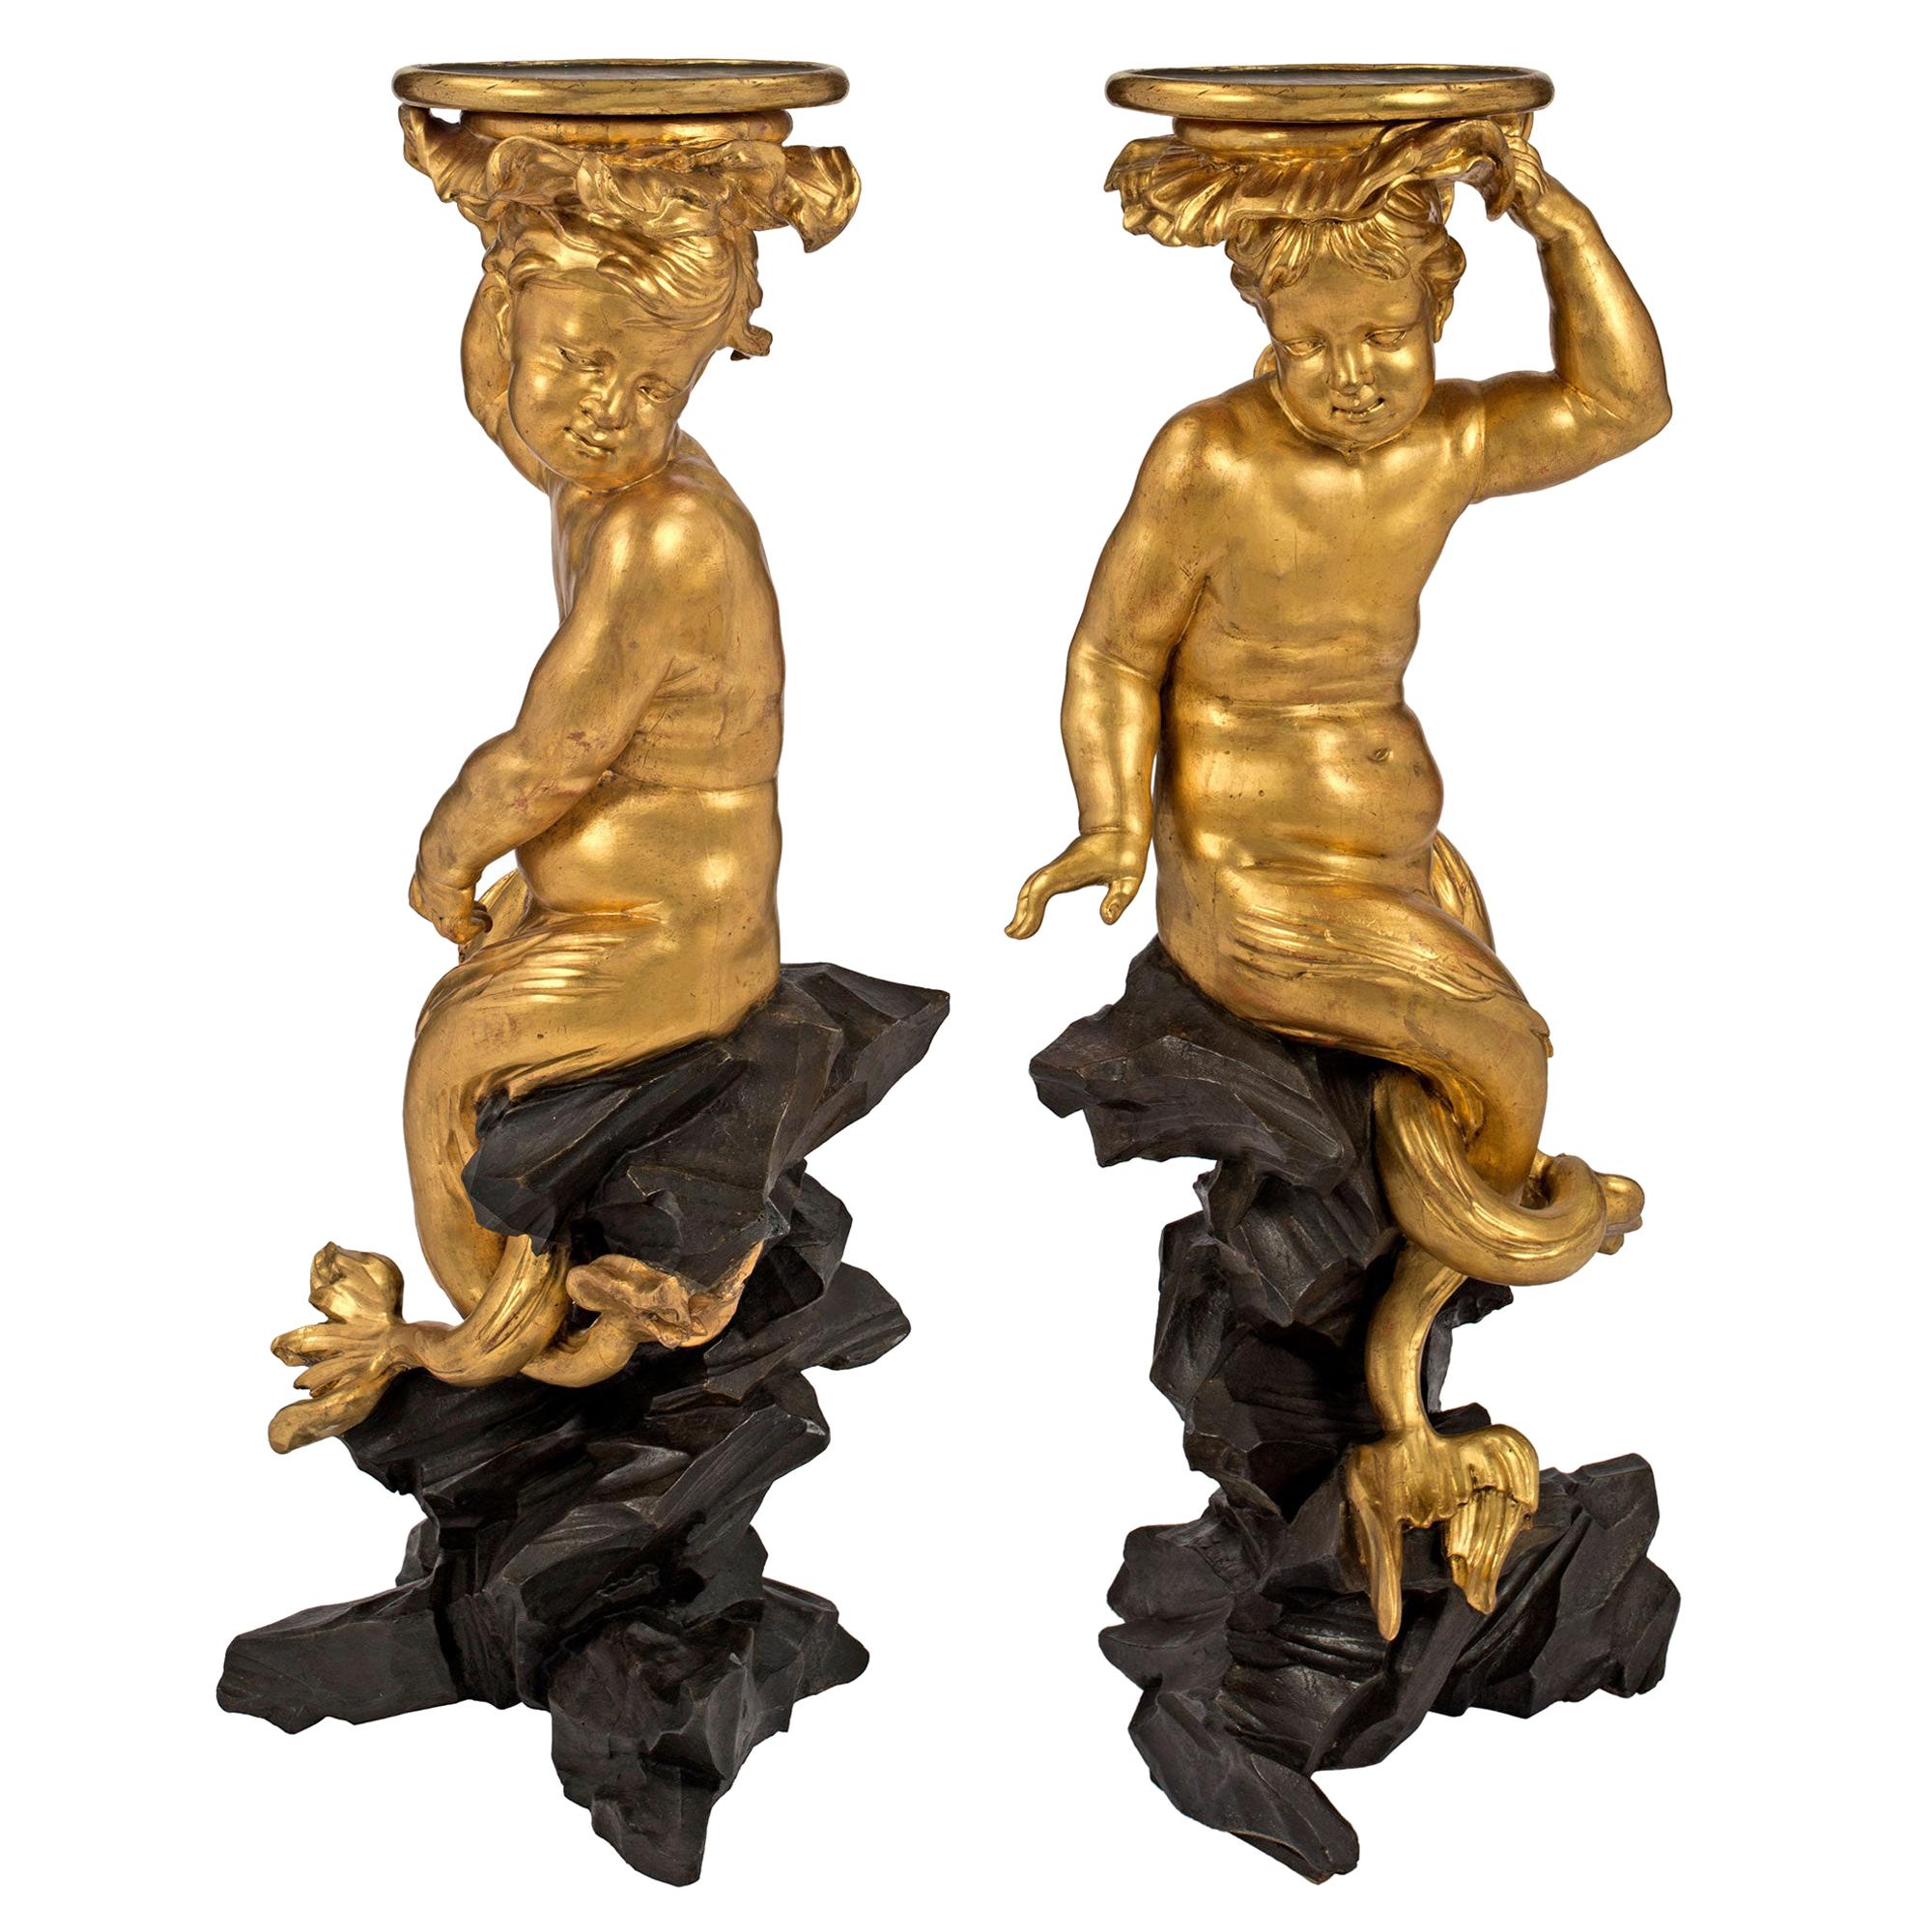 Pair of Italian Early 18th Century Roman Giltwood and Black Polychrome Pedestals